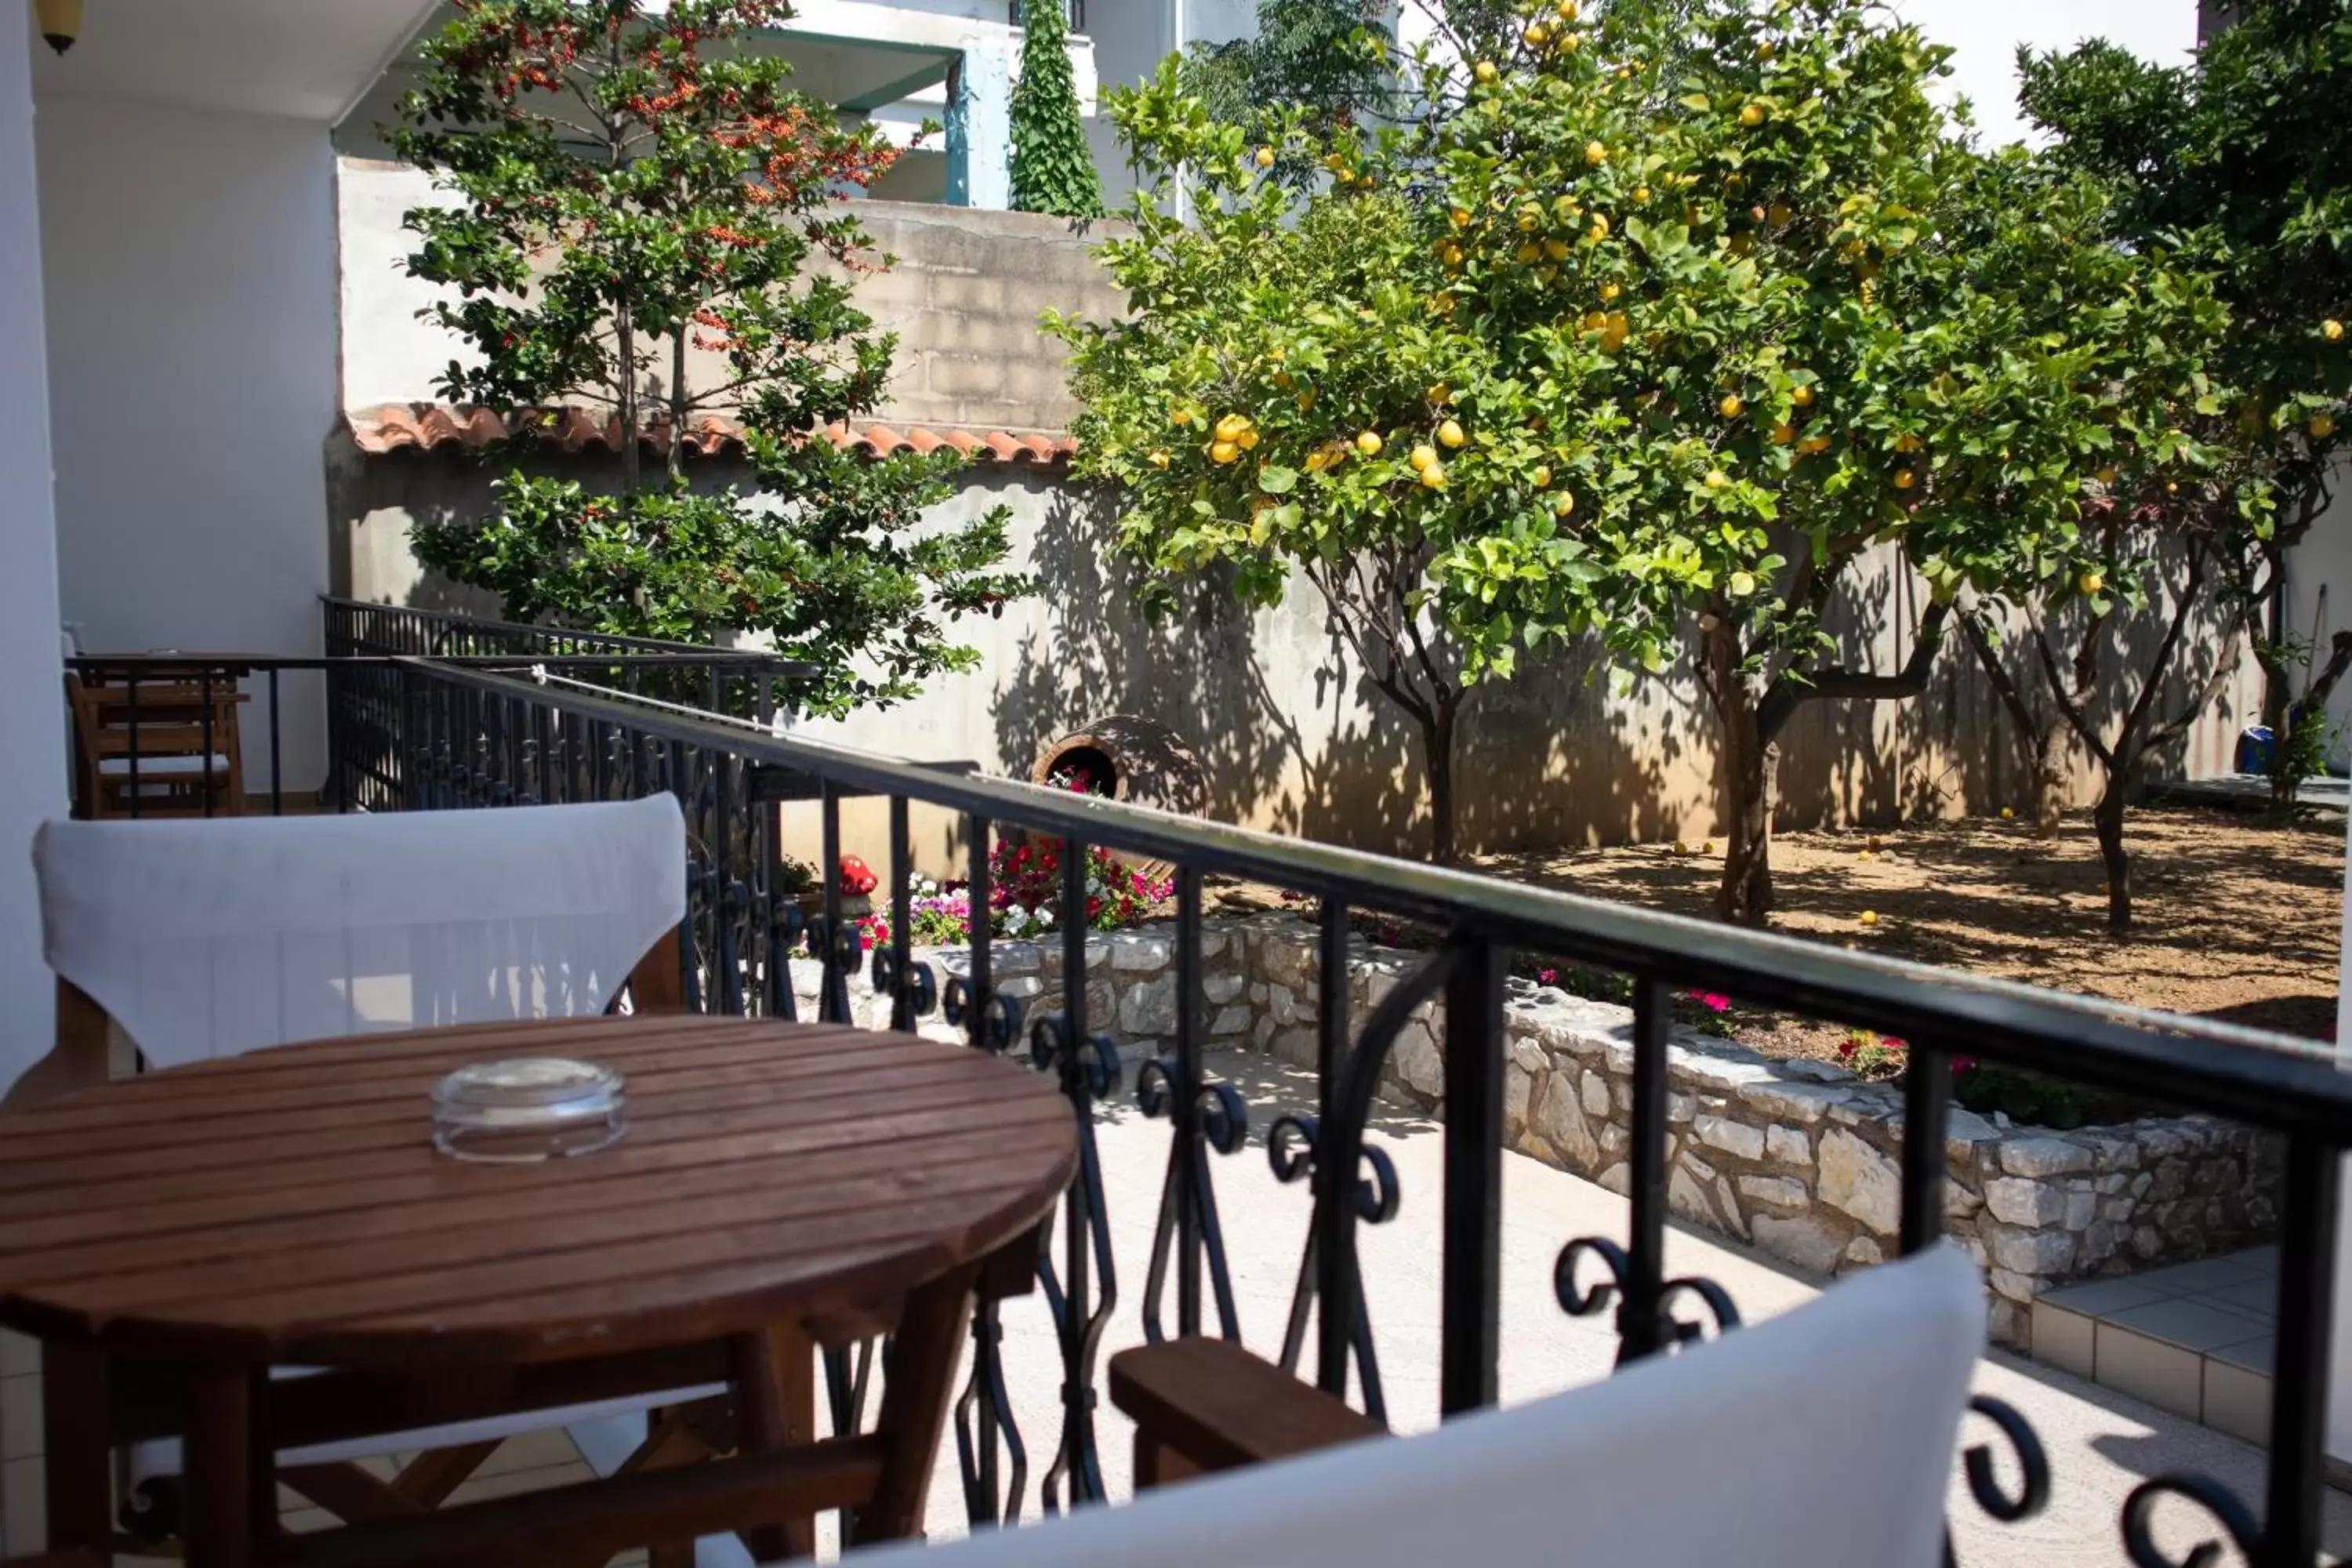 Property building, Balcony/Terrace in ATHANASIA APARTMENTS